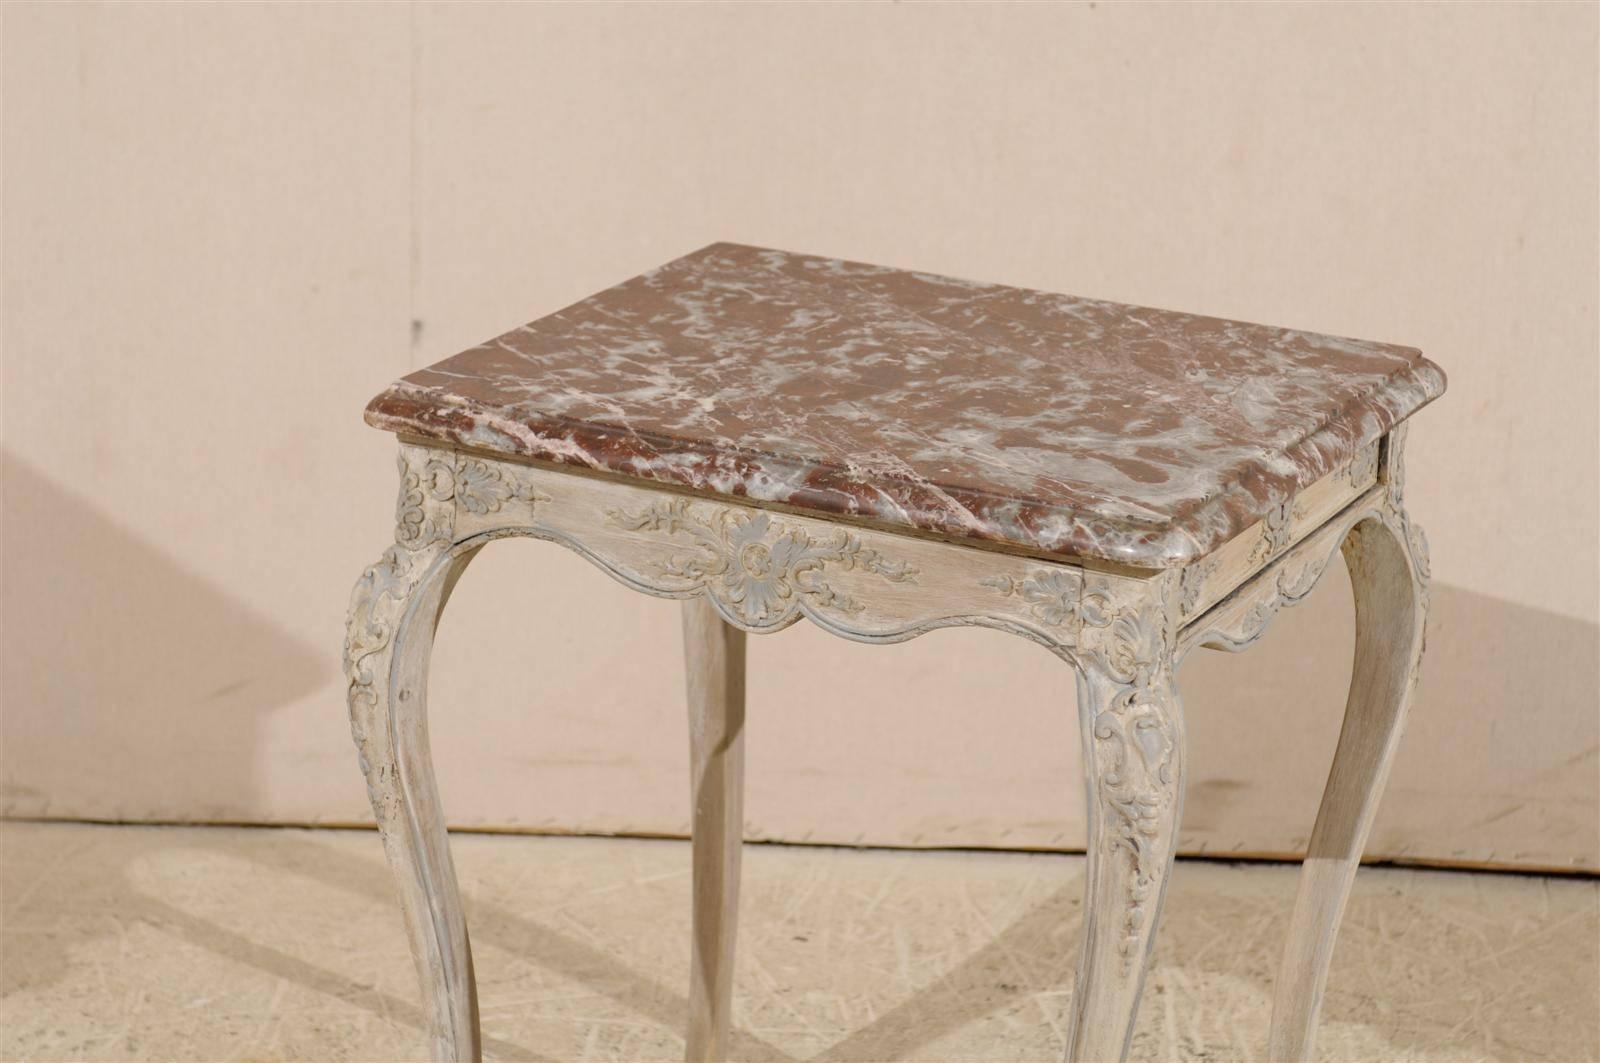 Painted French Early 19th Century Louis XV Style Side Table with Red Marble Top